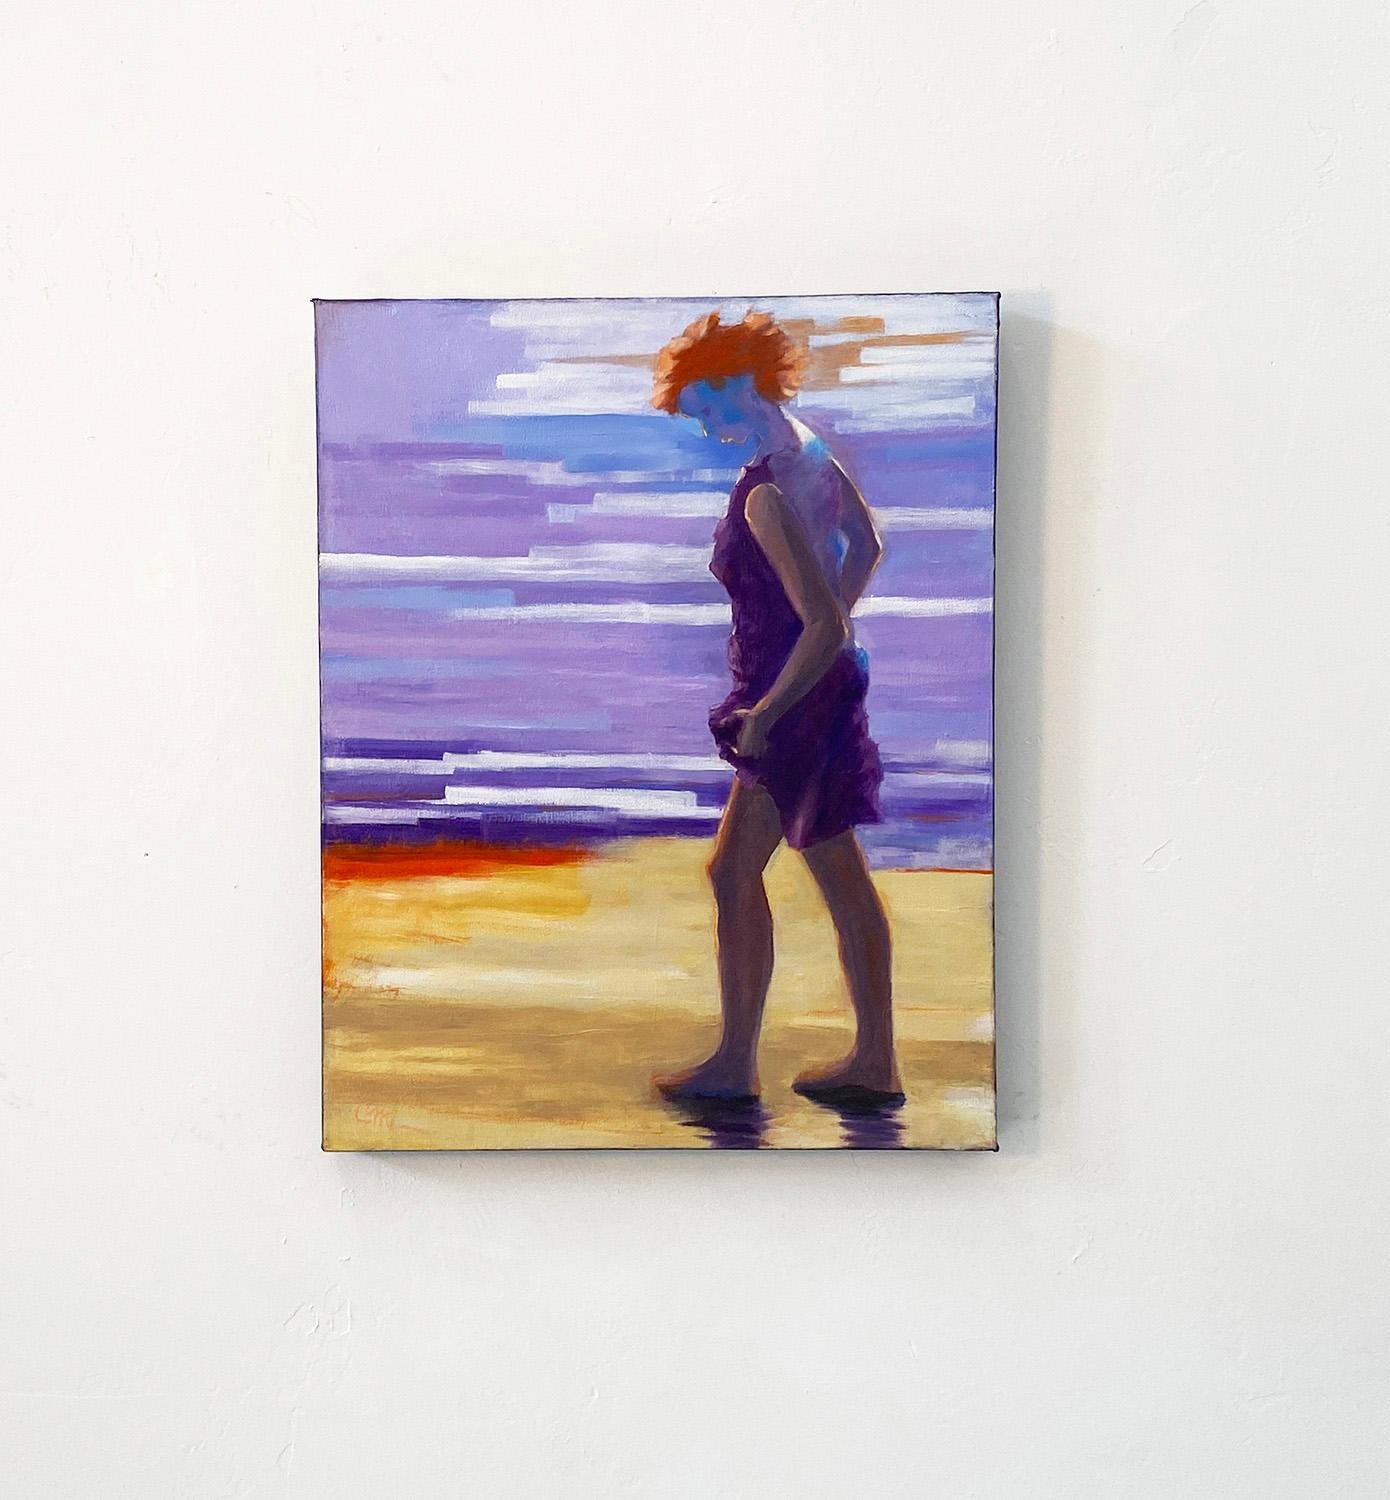 <p>Artist Comments<br />A woman holds her dress as she walks on the beach. The bright golden light outlines her body, setting her apart from the abstract purple horizon in the background. With broad brushstrokes, artist Connie Millholland uses